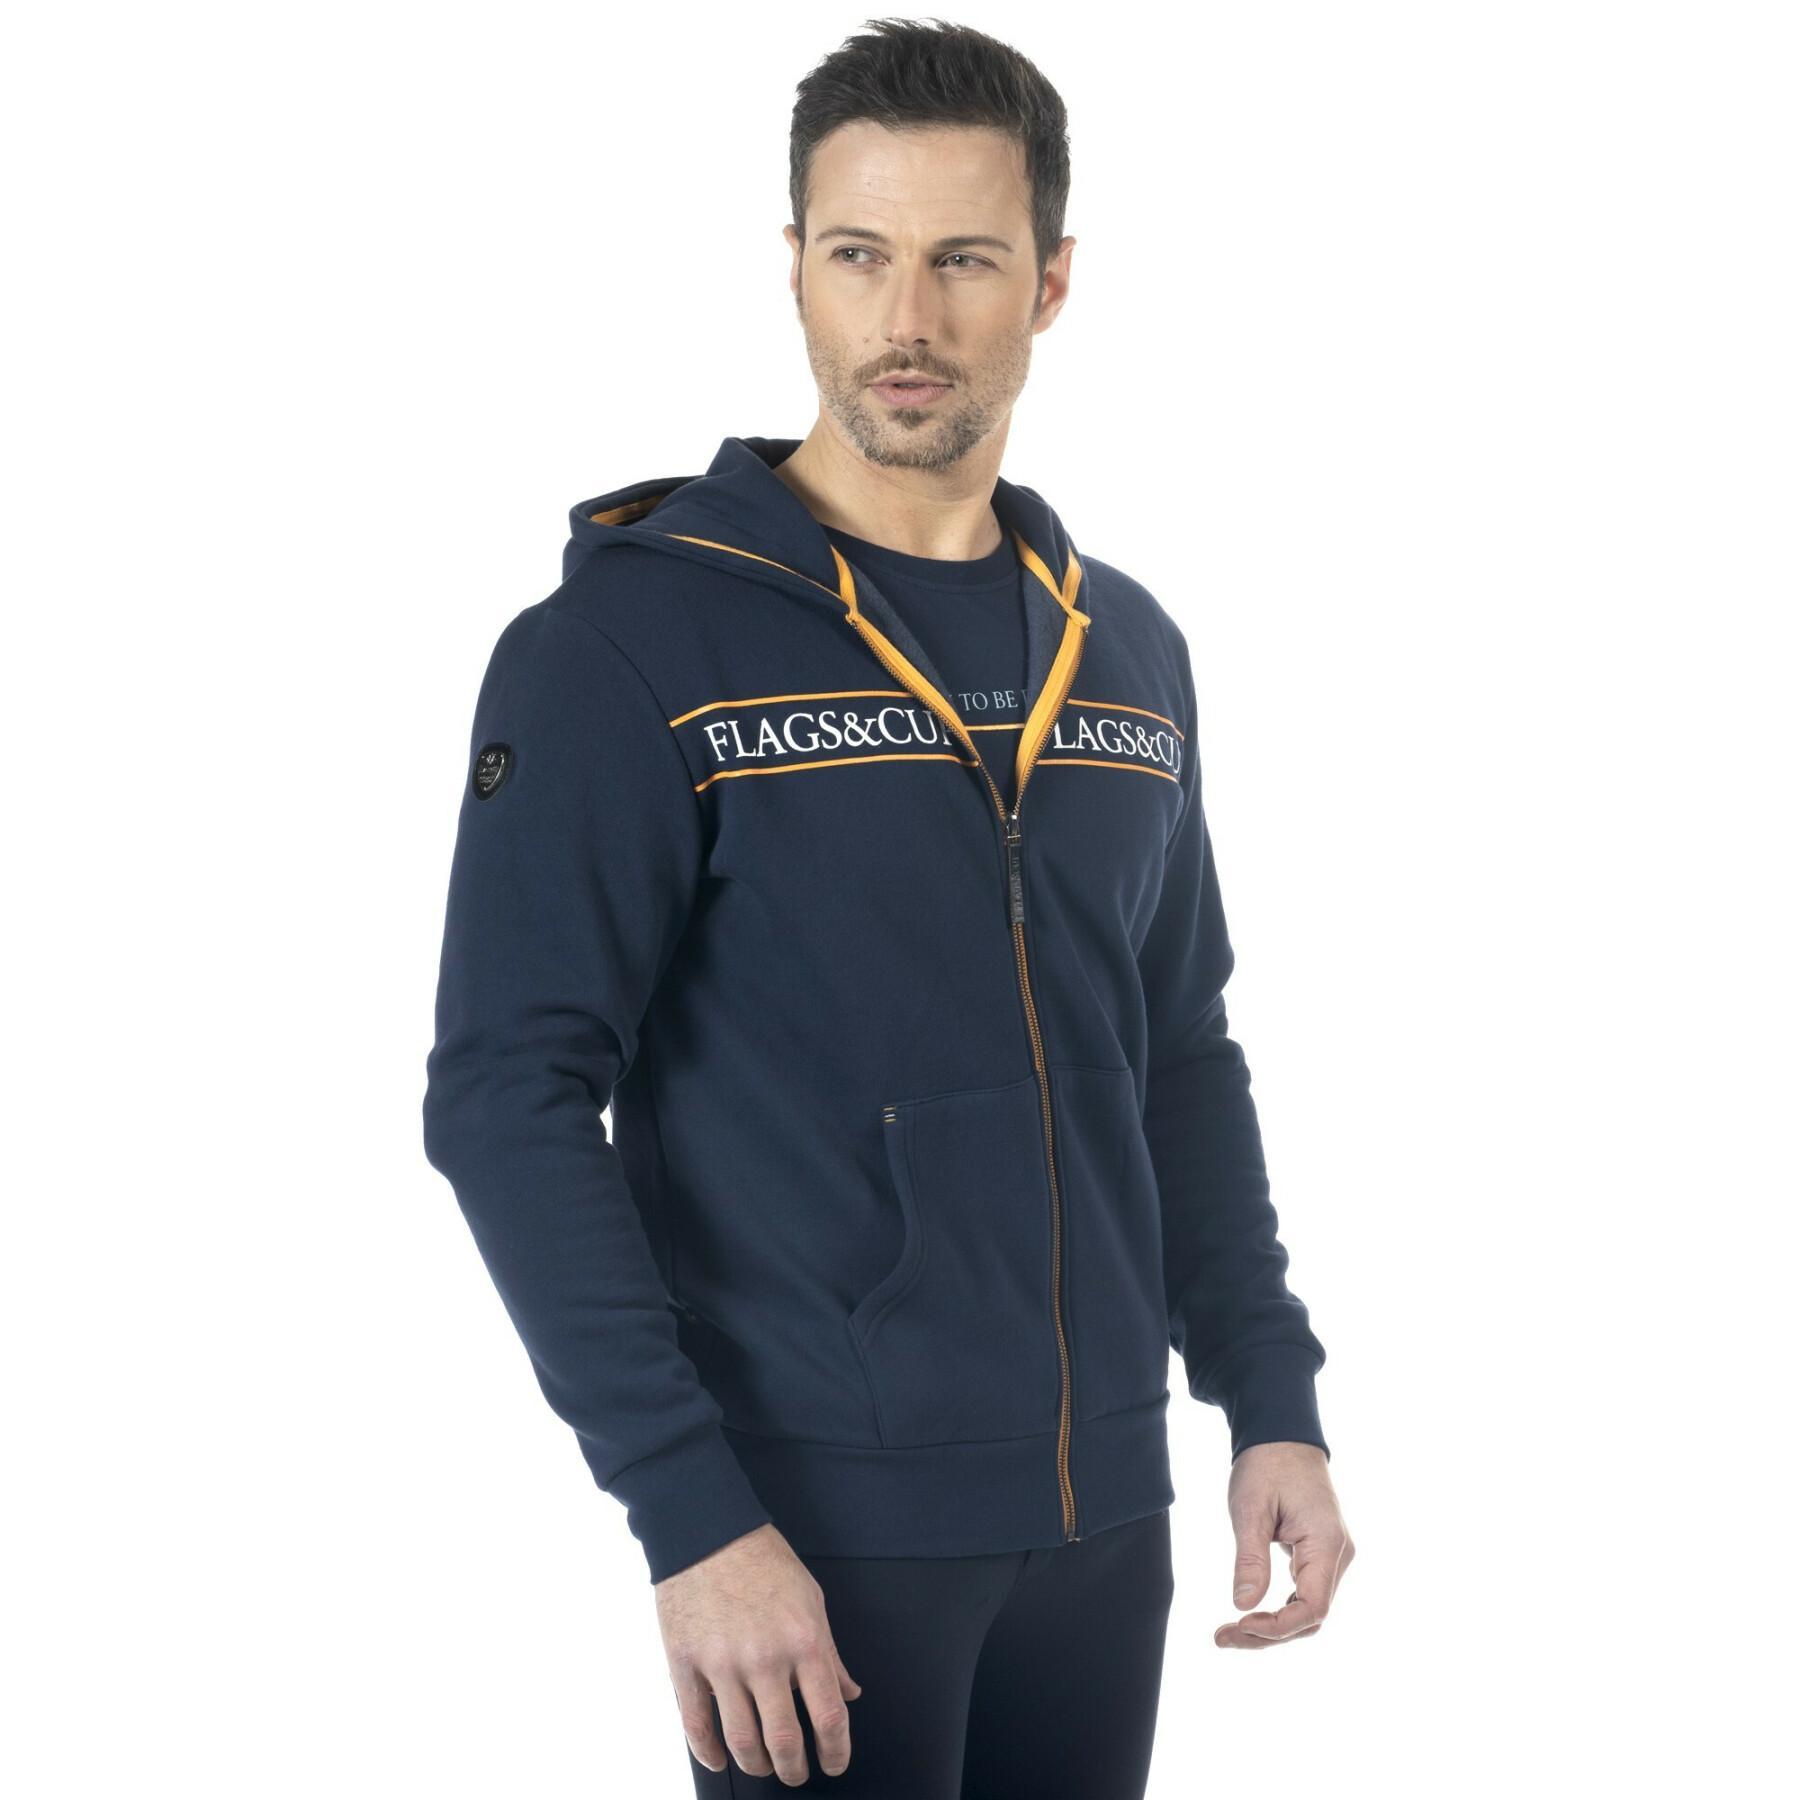 Hooded riding sweatshirt Flags&Cup Perico